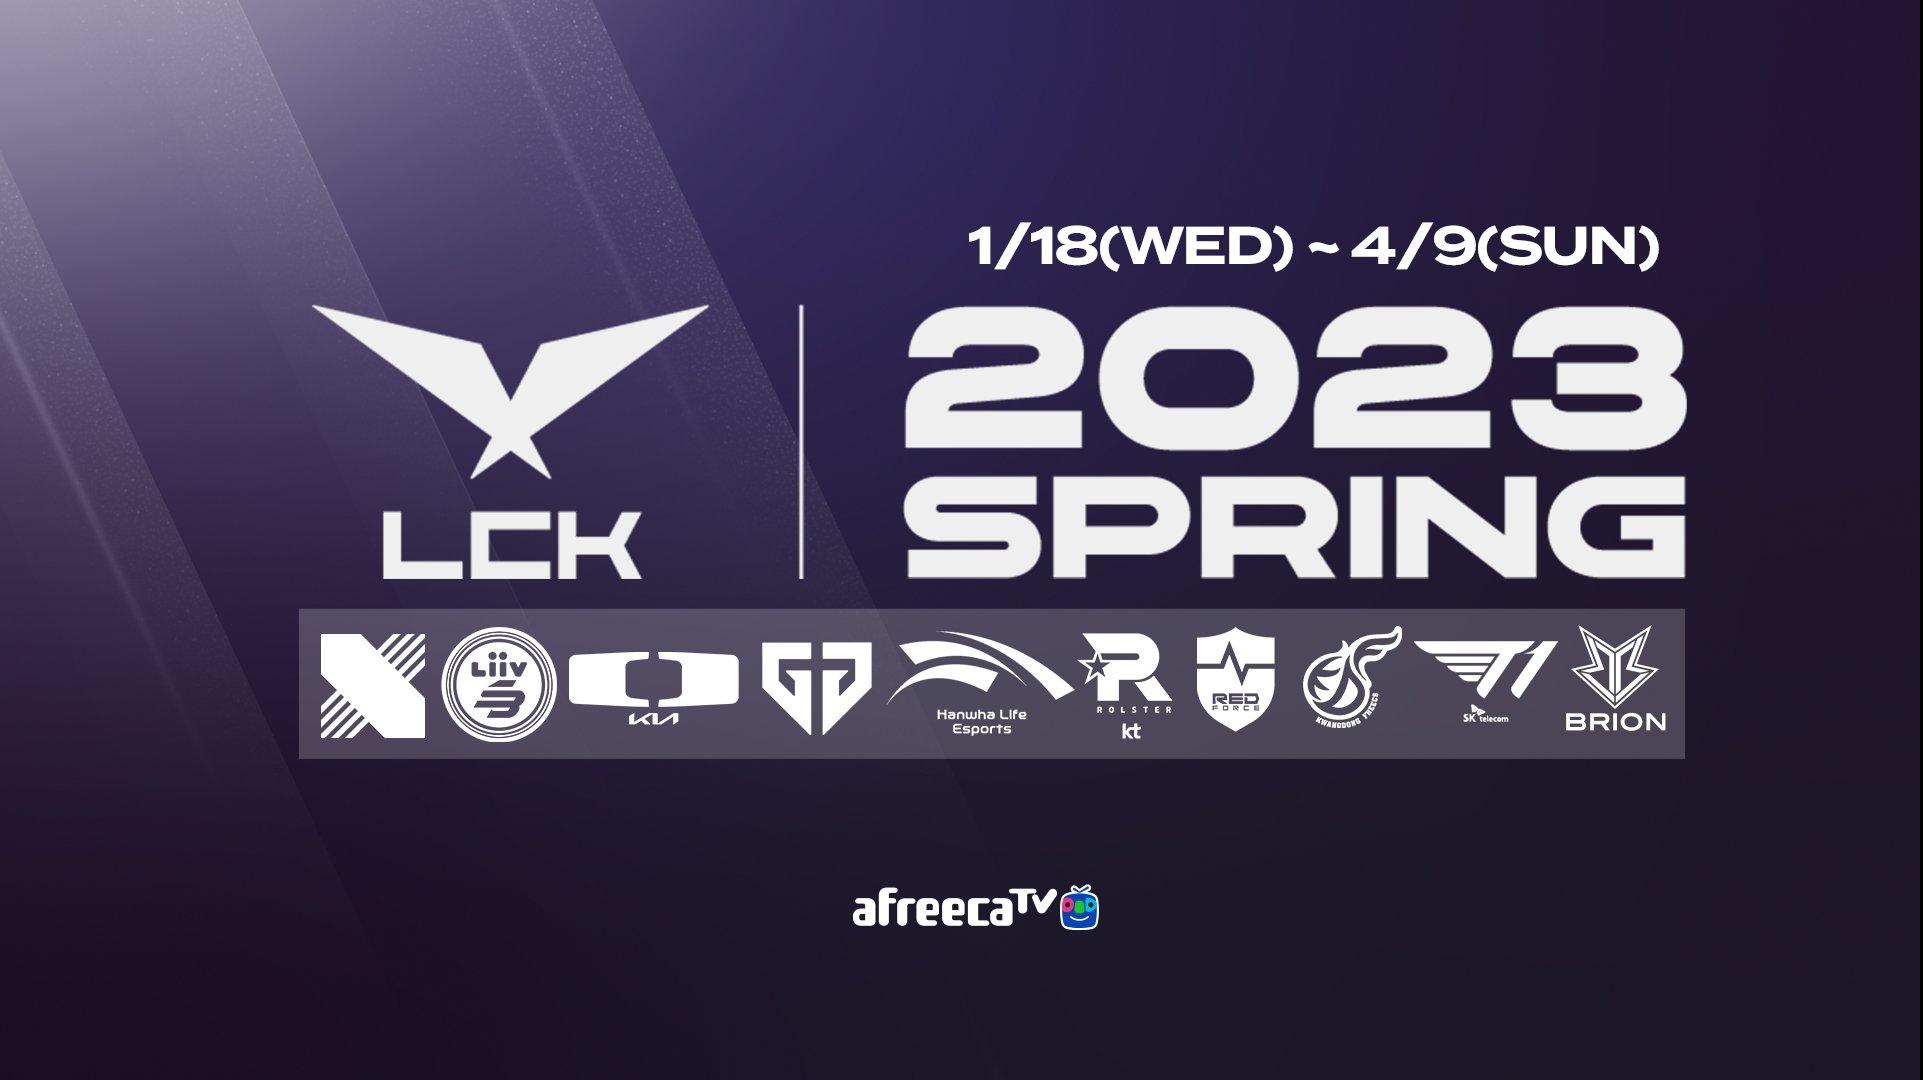 2023 LCK Spring feature image